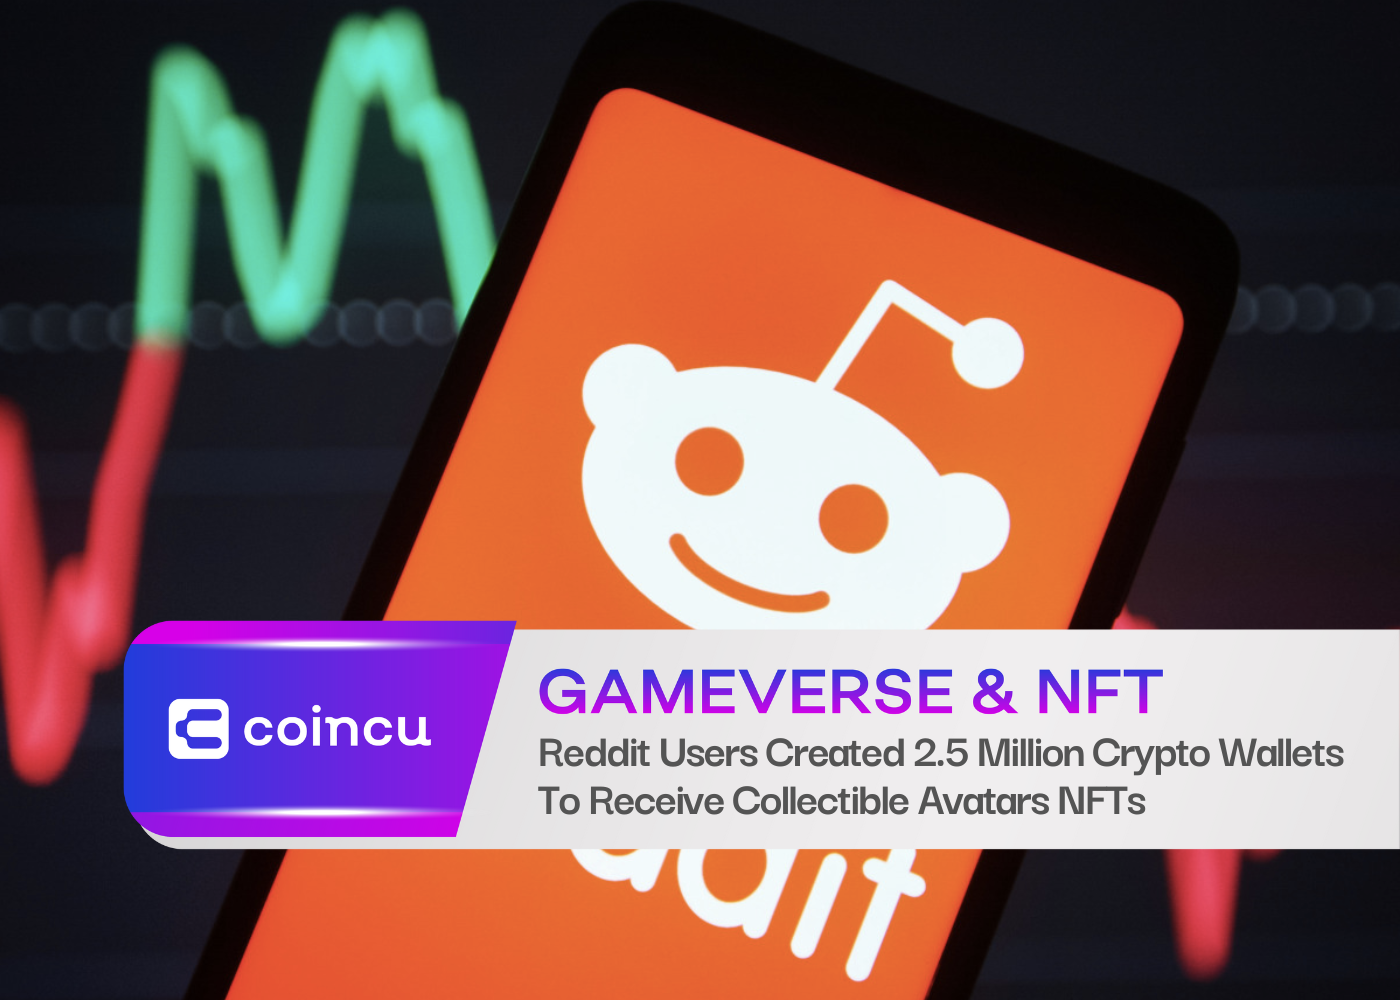 Reddit Users Created 2.5 Million Crypto Wallets To Receive Collectible Avatars NFTs